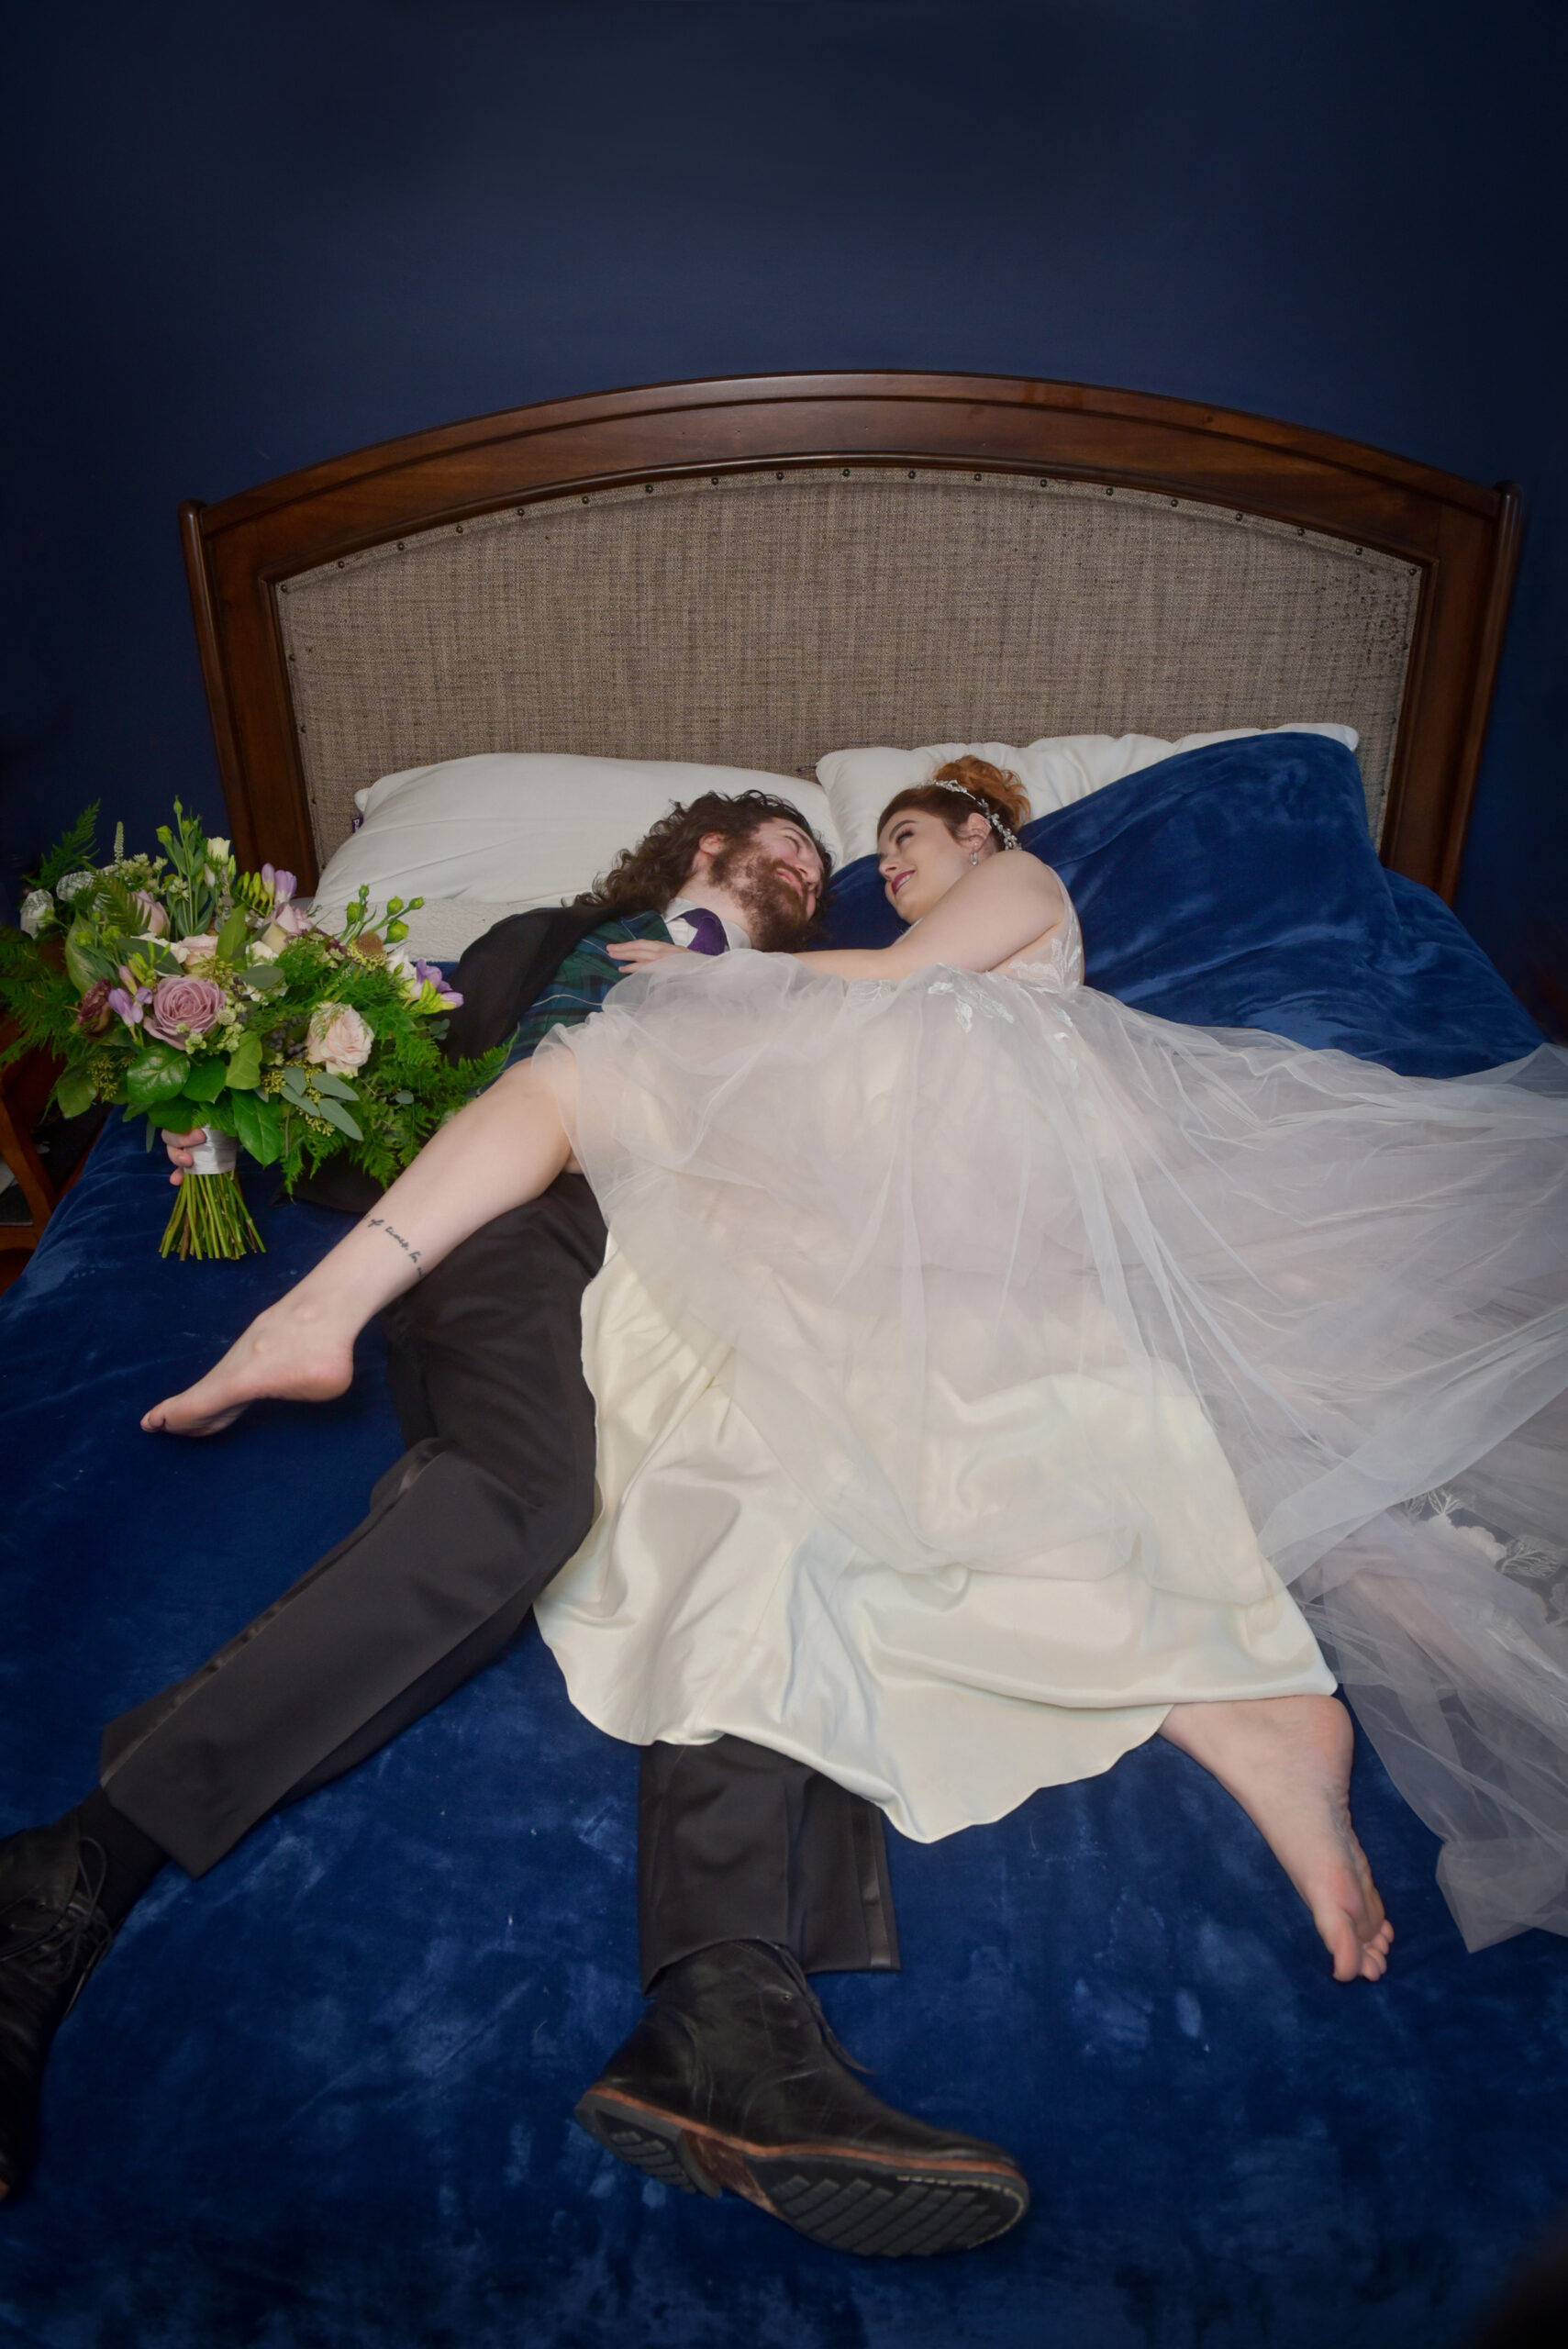 The bride and groom in their favorite location; bed!